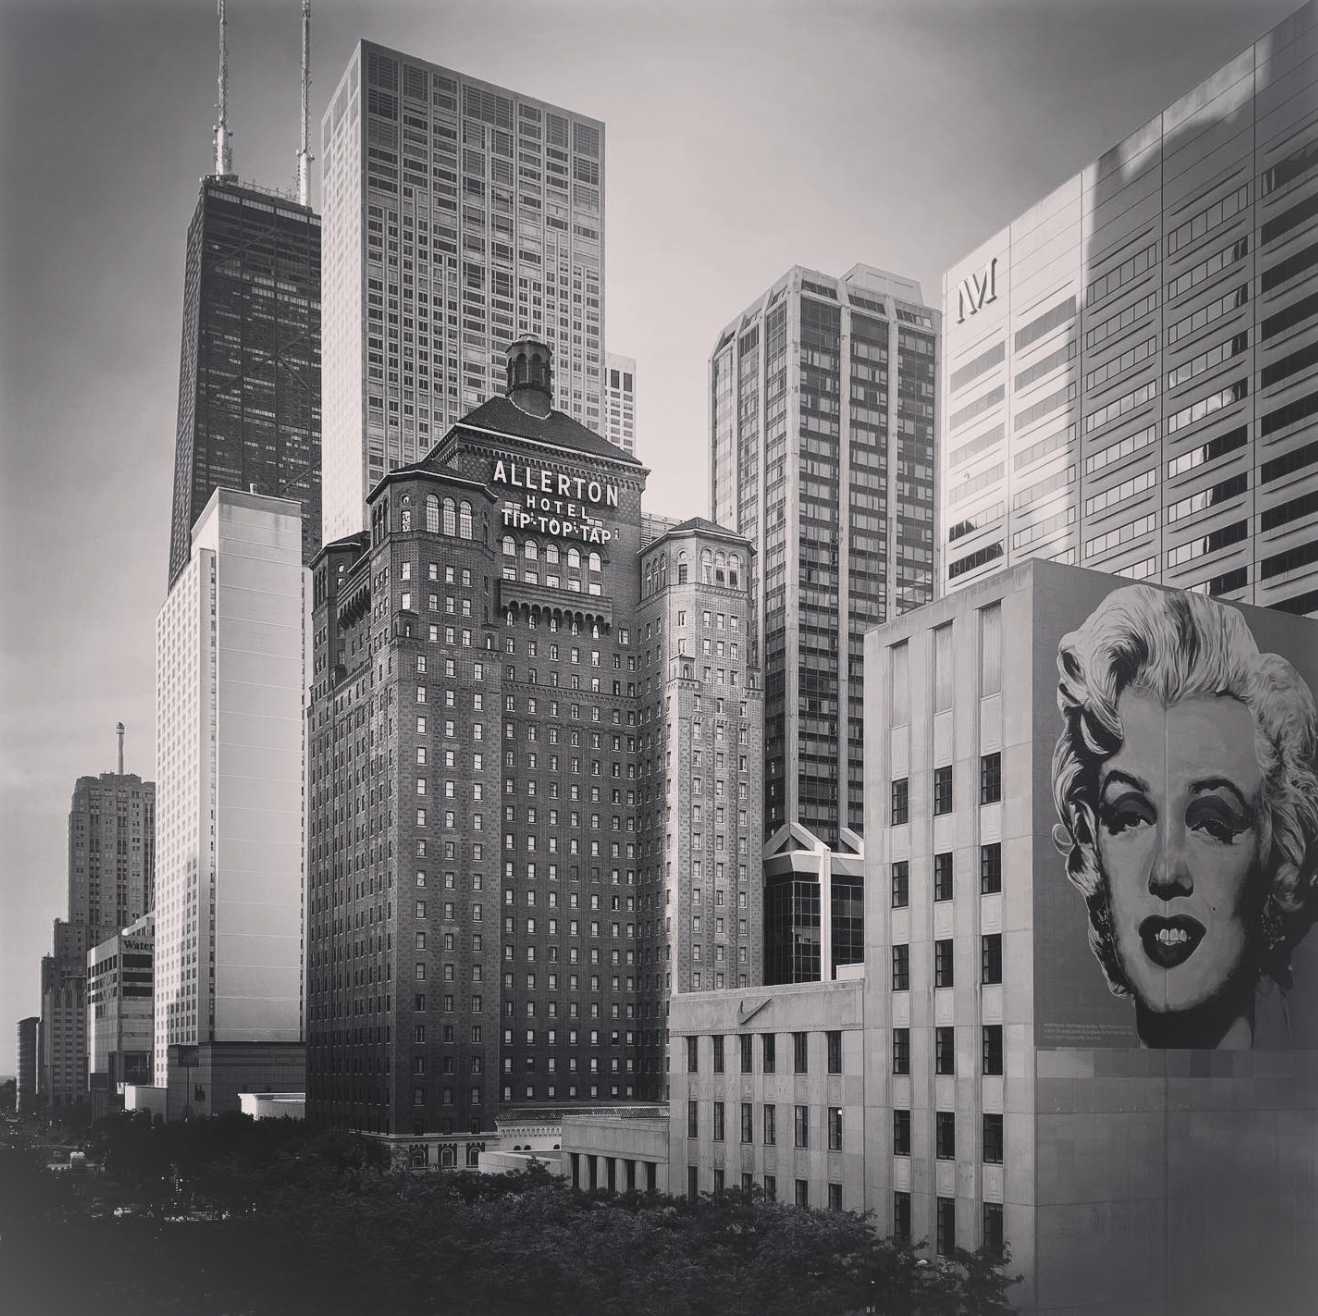 Chicago History and Timeline - The Magnificent Mile